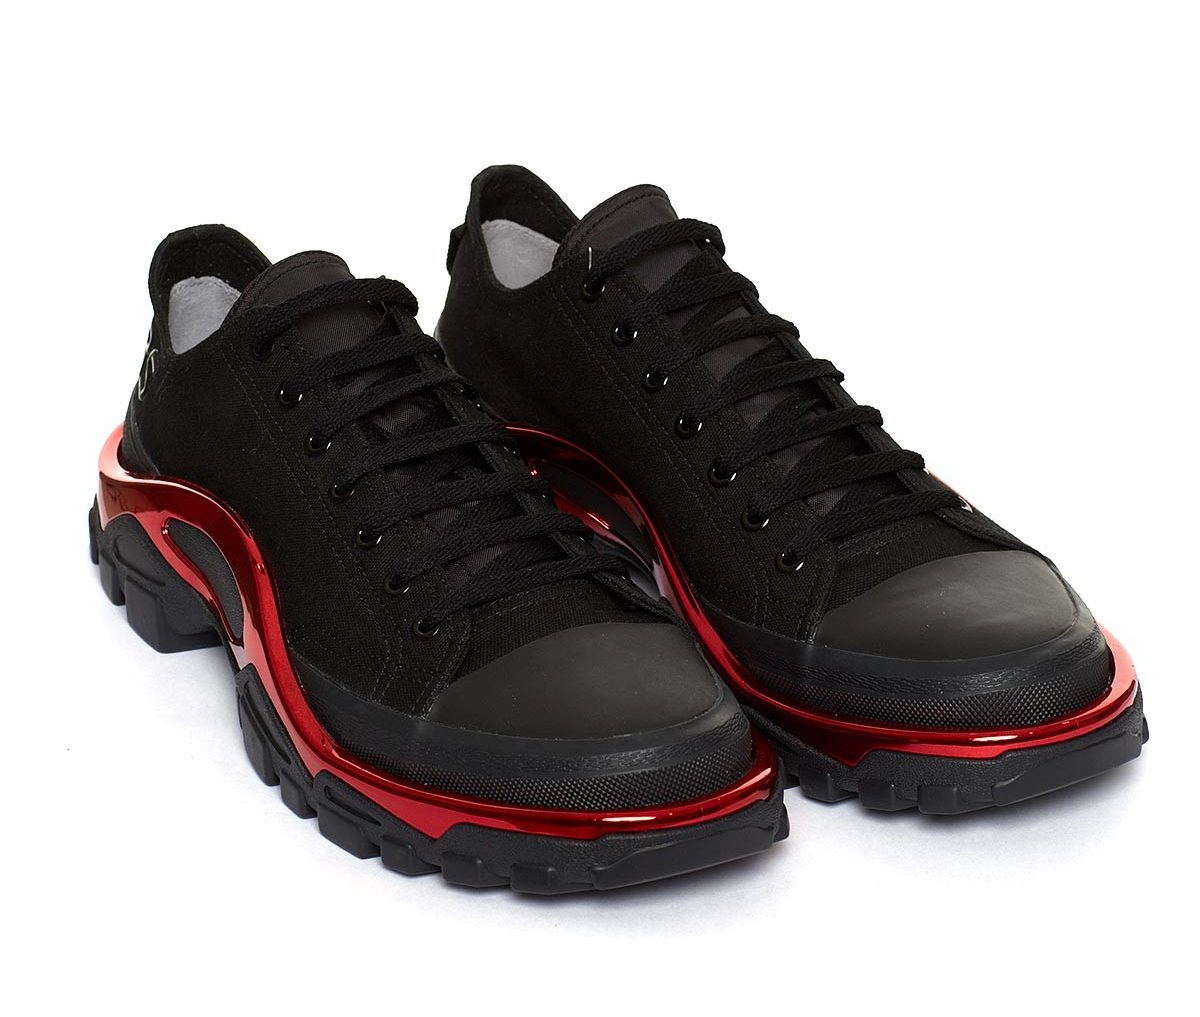 giay the thao ugly sneakers - raf simons adidas new runner - elle man